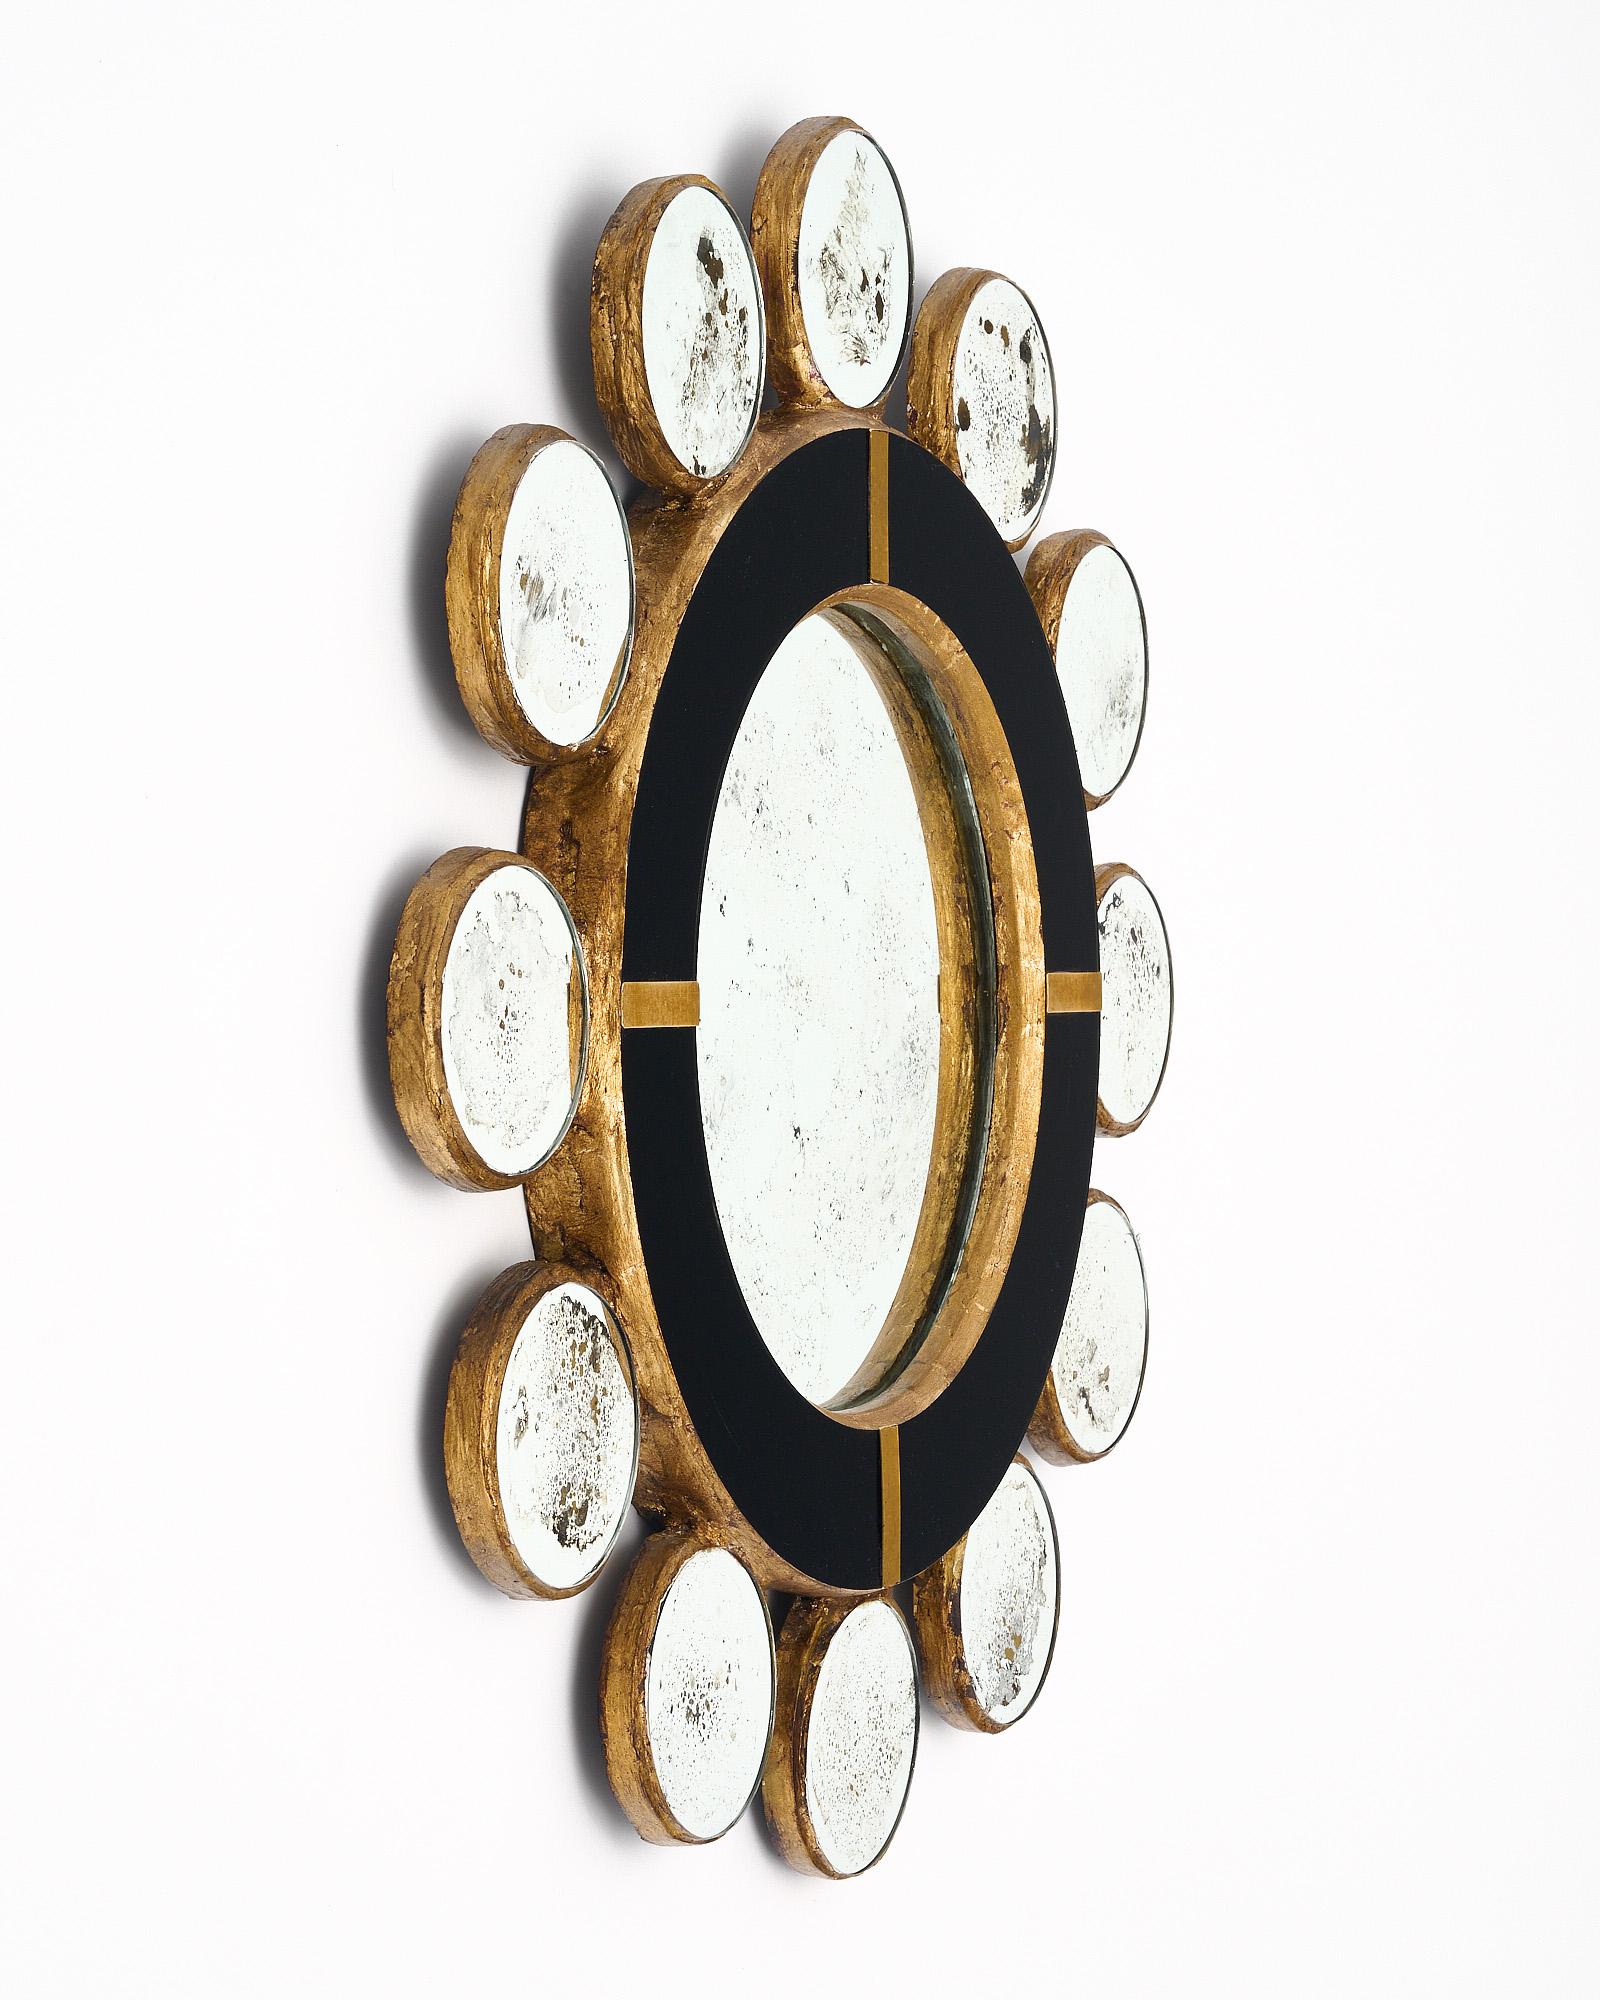 Mirror, from Spain, with a gold leafed wooden frame that has been veneered with opaline black glass. The central mirror is surrounded with eglomised spheric mirrors. Brass accents.